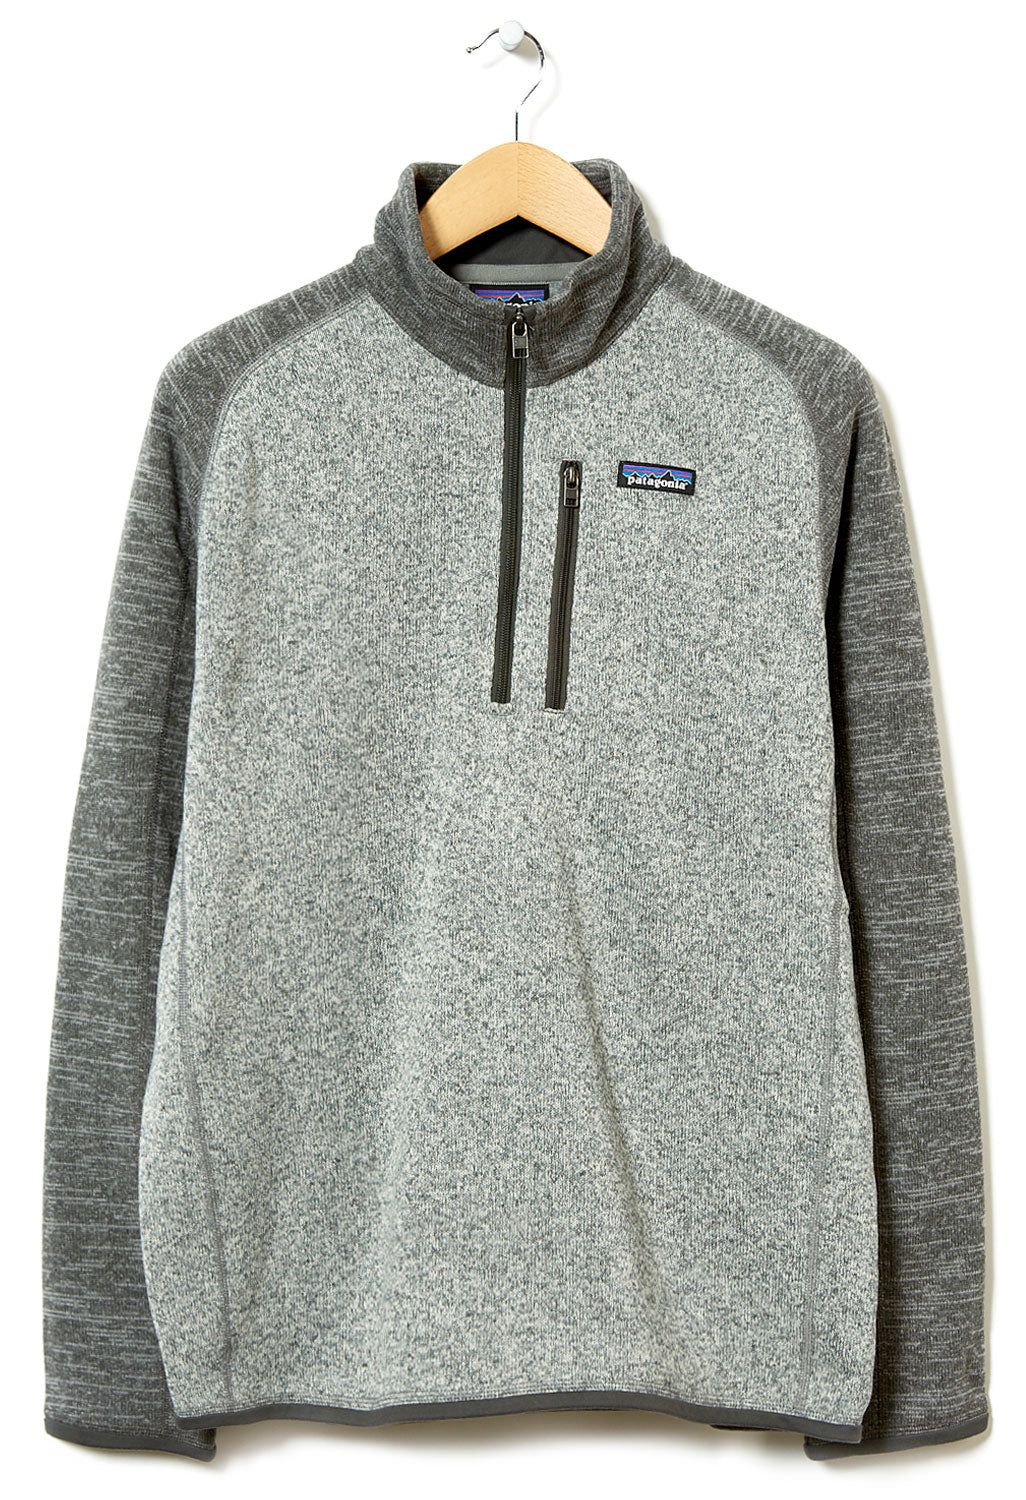 Patagonia Insulated Better Sweater Hoody Zip Up Jacket Gray + Blue M Men's  Used